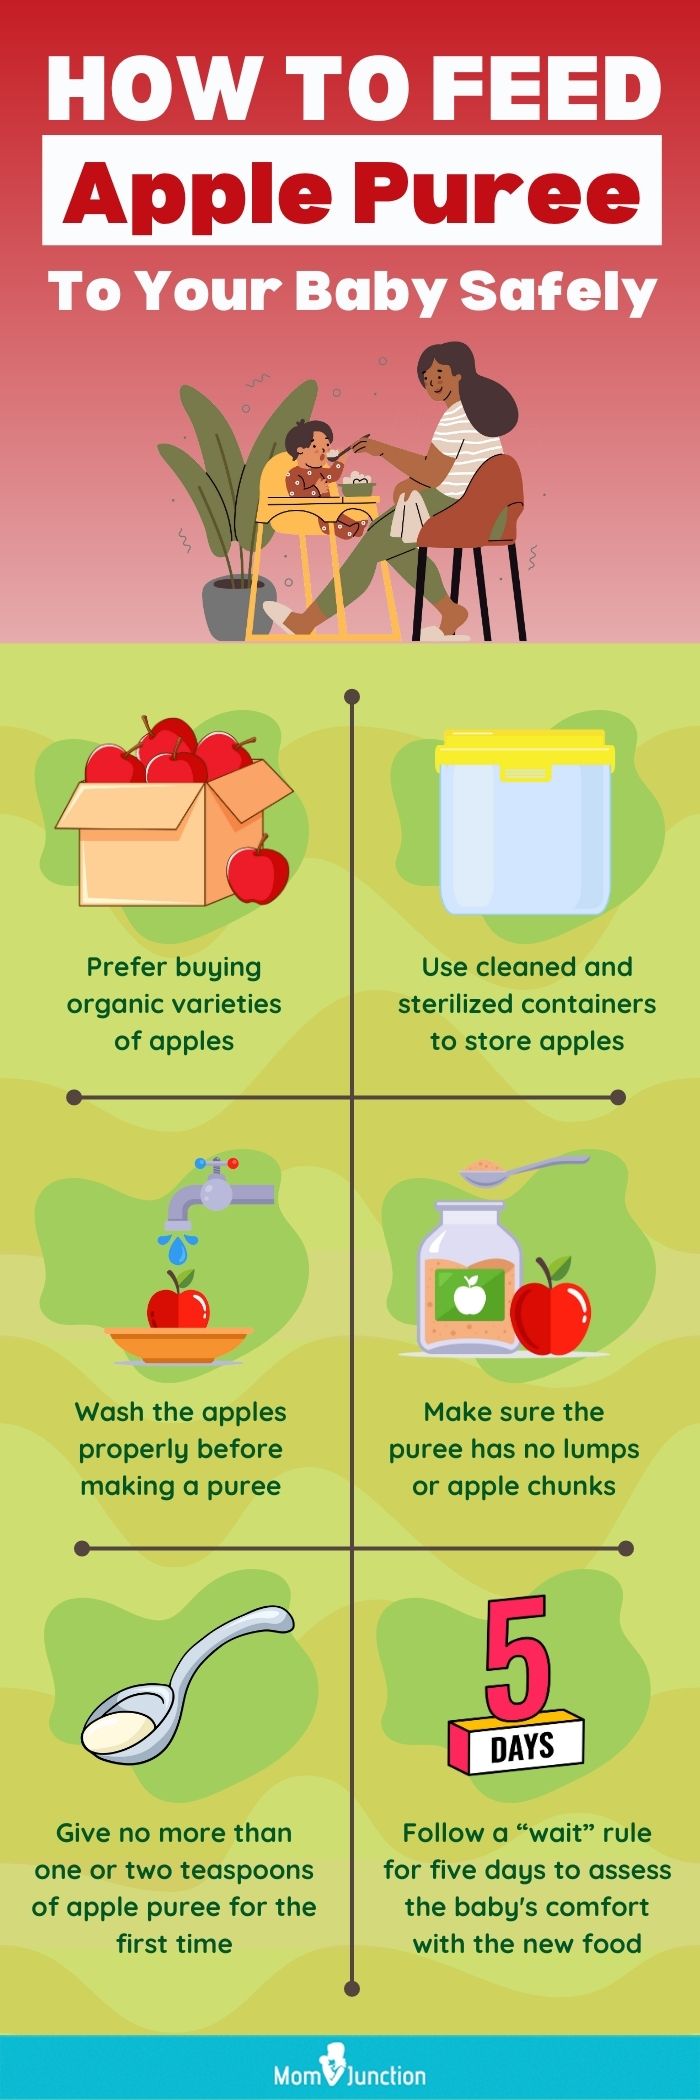 how to feed apple puree to your baby safely [infographic]